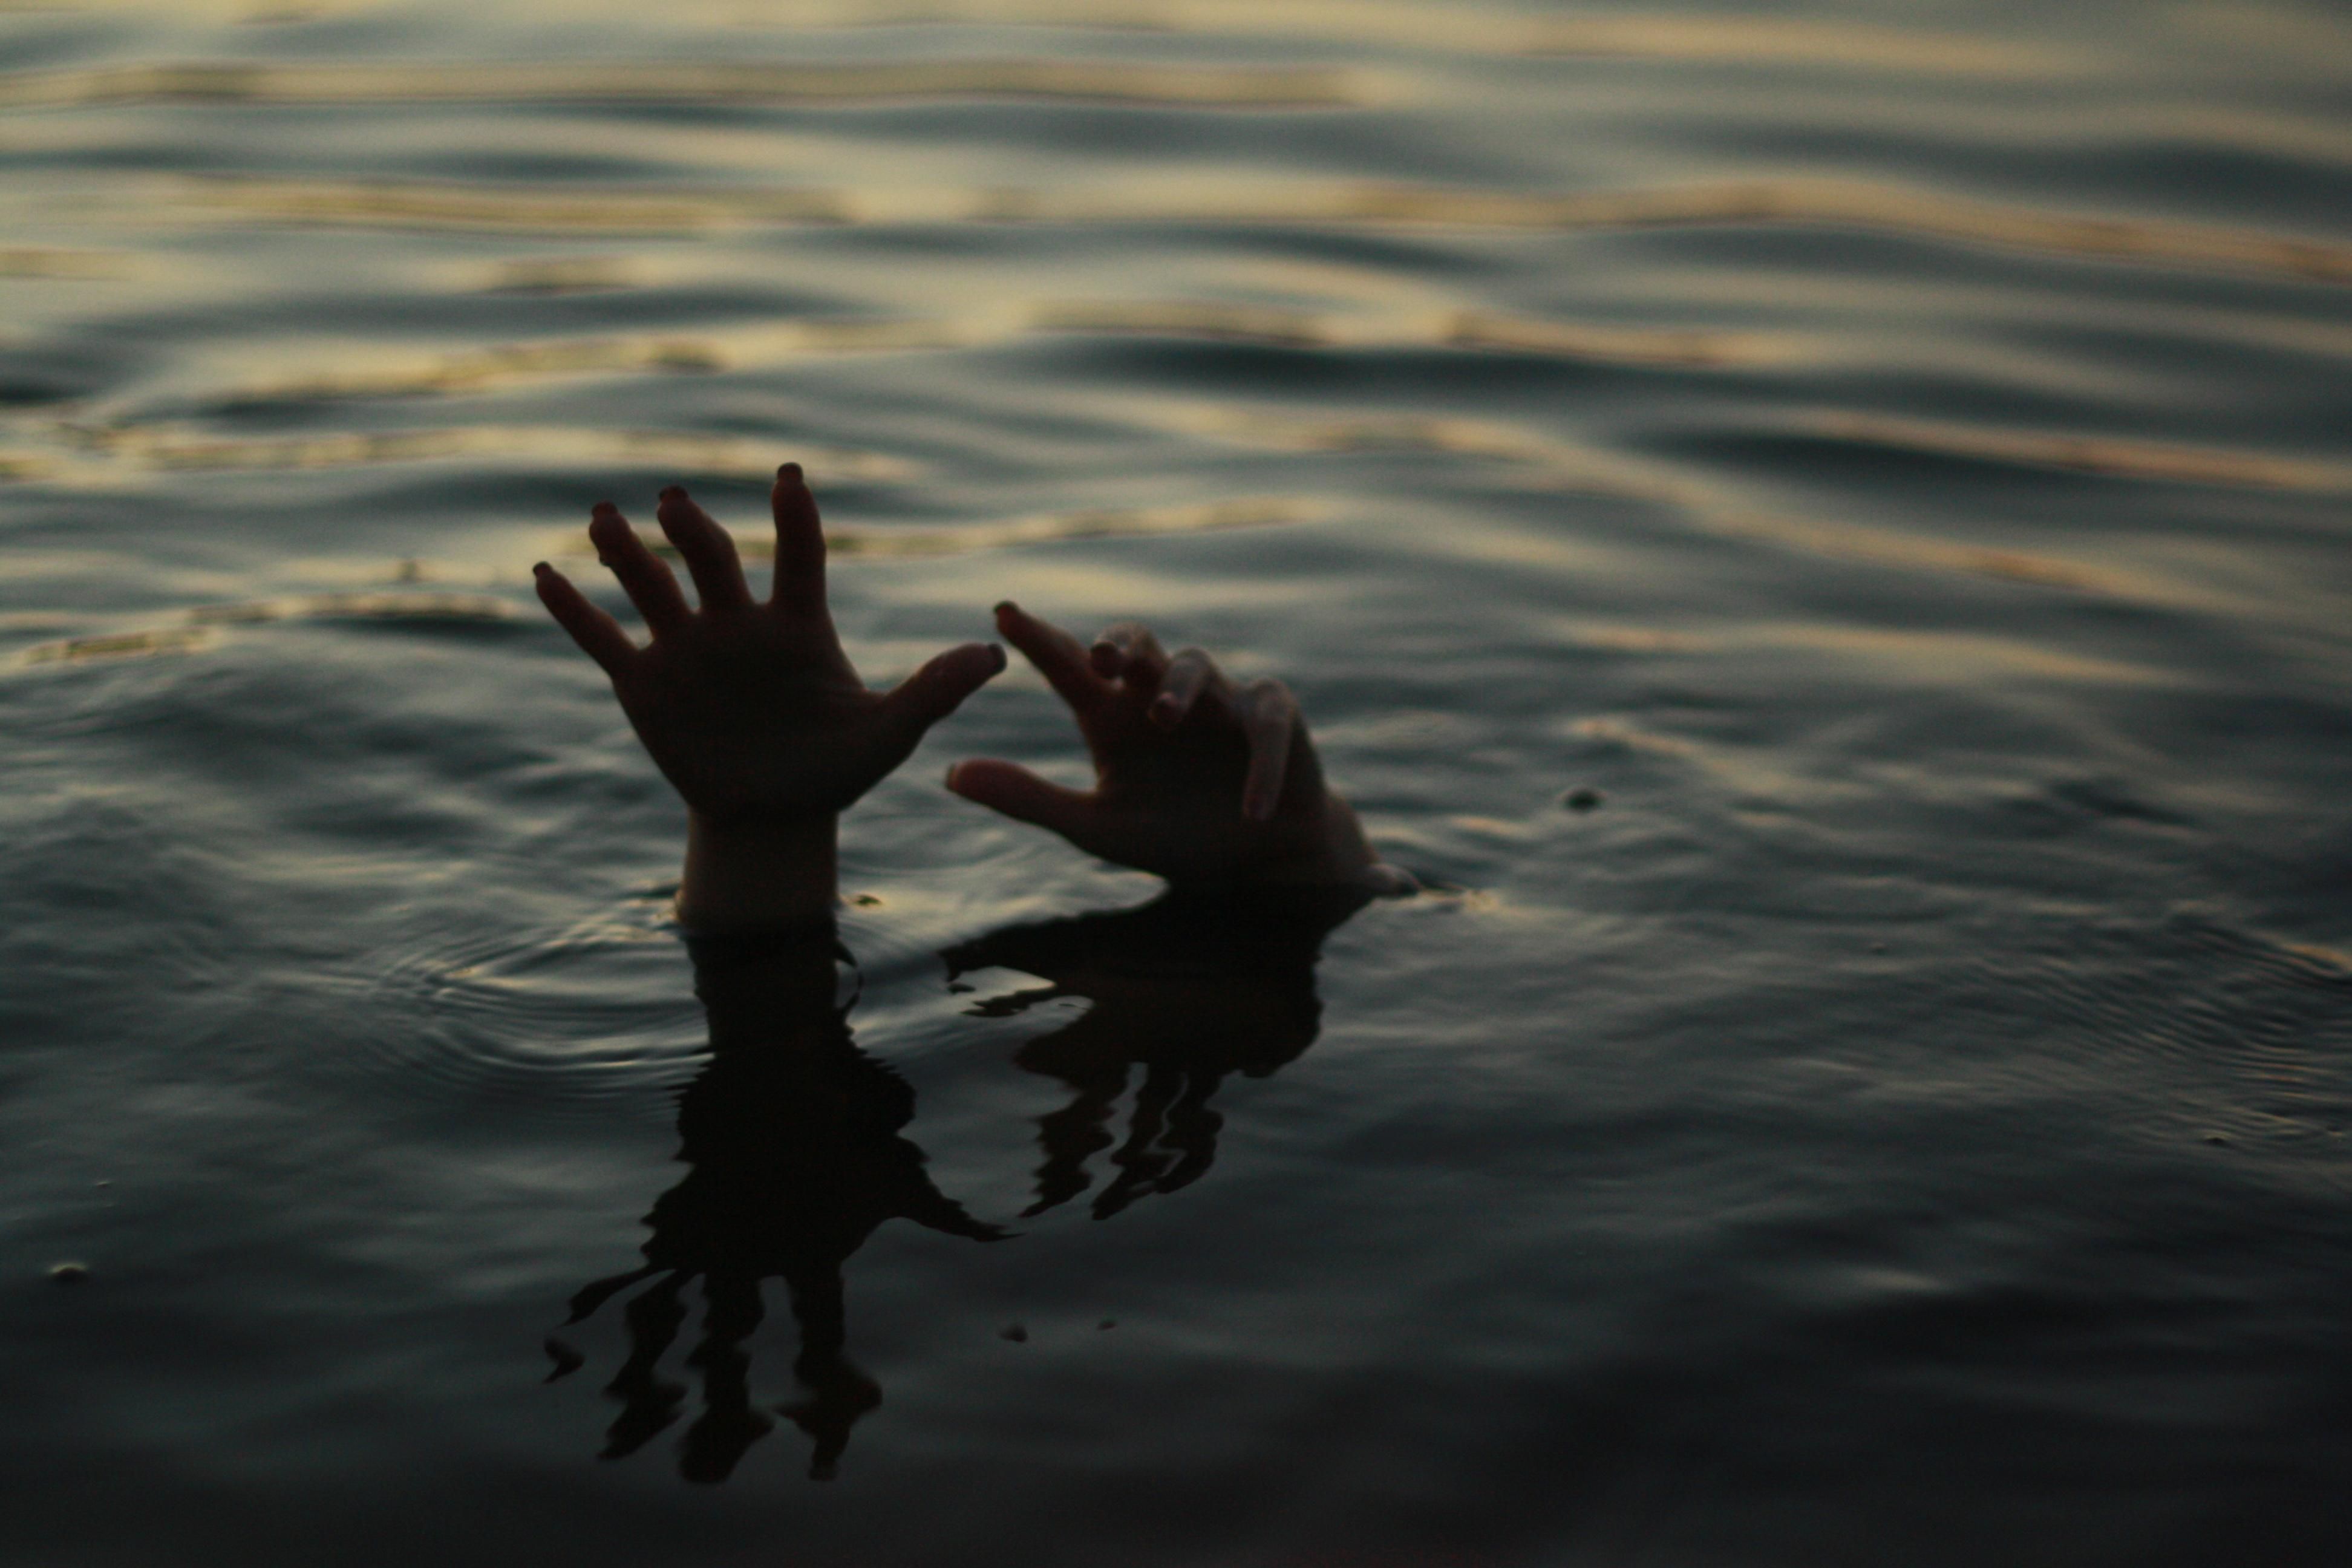 279995 drowning Nokia 7 Plus wallpaper free download 1080x2160  Rare  Gallery HD Wallpapers